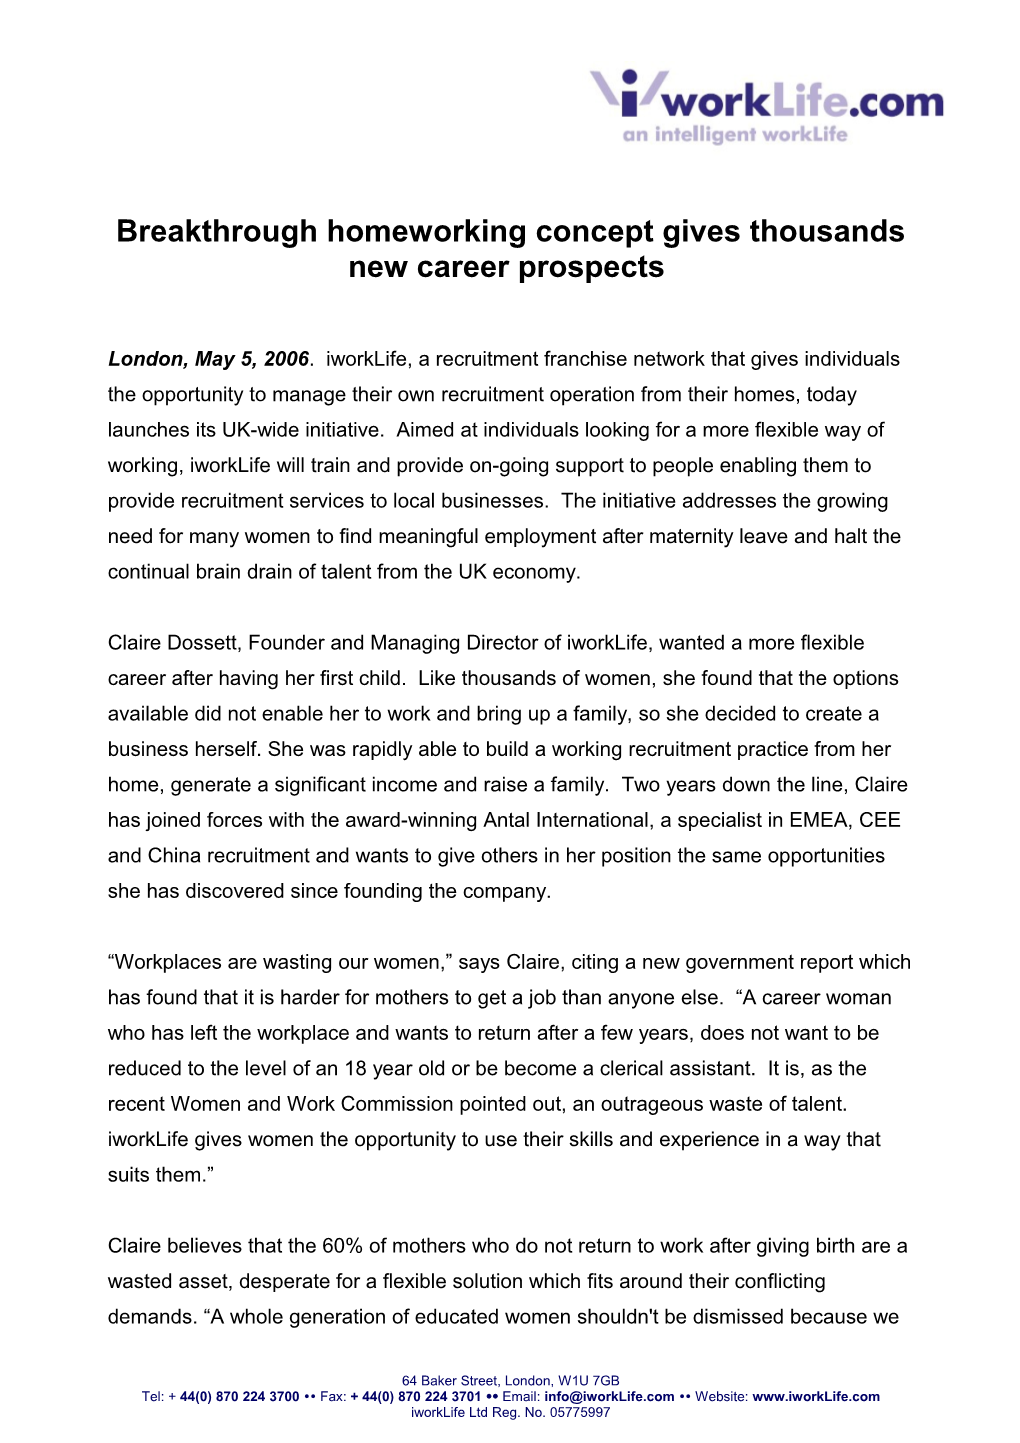 Breakthrough Homeworking Concept Gives Thousands New Career Prospects